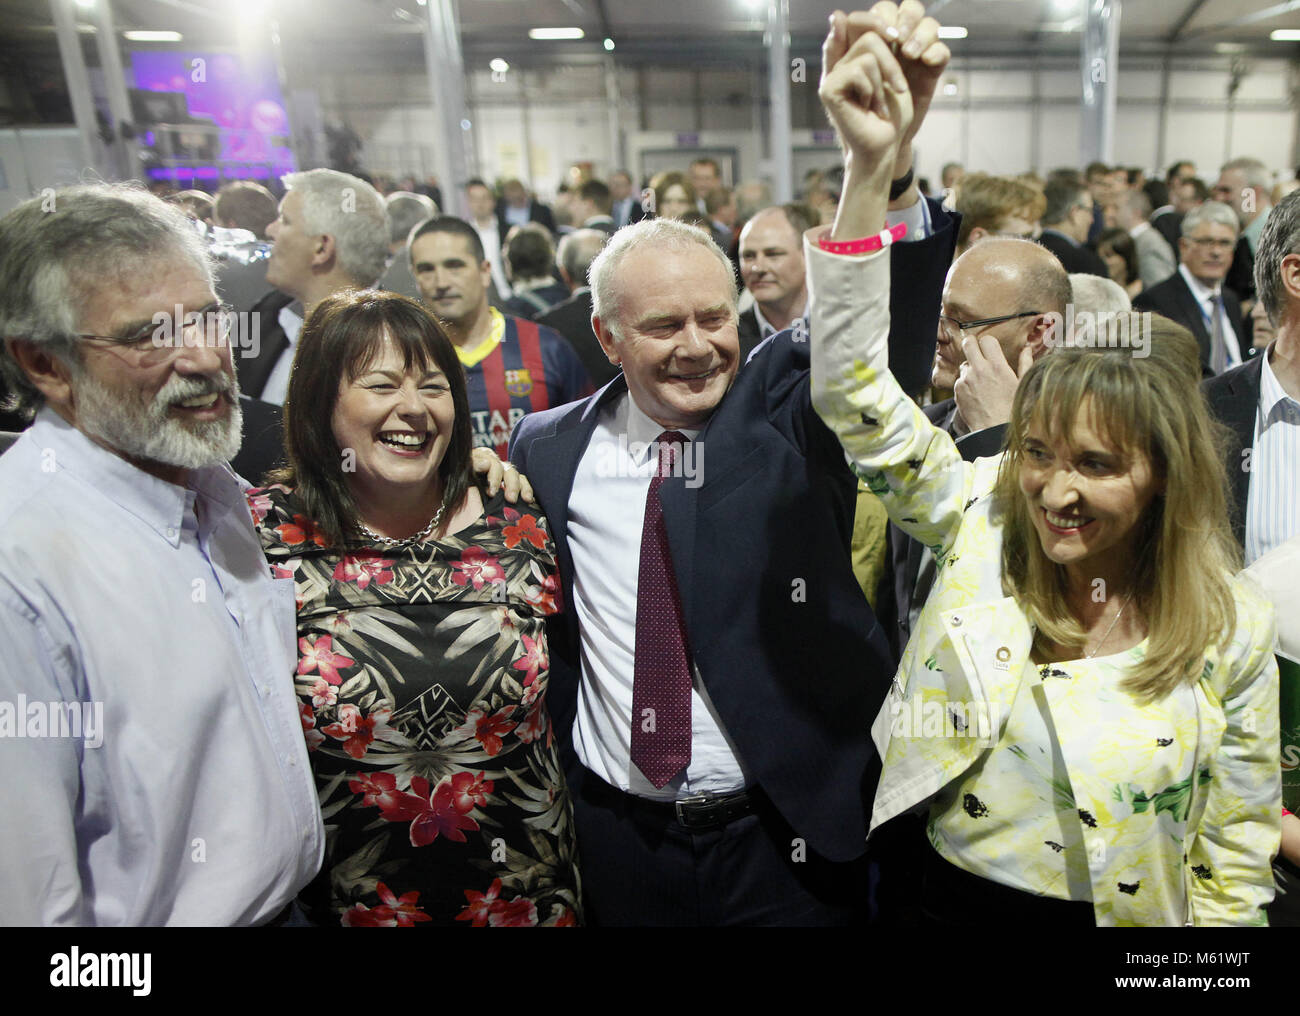 Sinn Fein's Martina Anderson, centre celebrates with party members Michelle Gildernew, right, and Martin McGuinness, left, after topping the poll at the Kings Hall count centre, Belfast, Northern Ireland, Monday, May 26, 2014. Anderson topped the poll in the European elections for Northern Ireland, She polled 159,813 votes, beating the quota by over 3,000 votes to become the first of Northern Ireland's MEP's. Photo/Paul McErlane Stock Photo